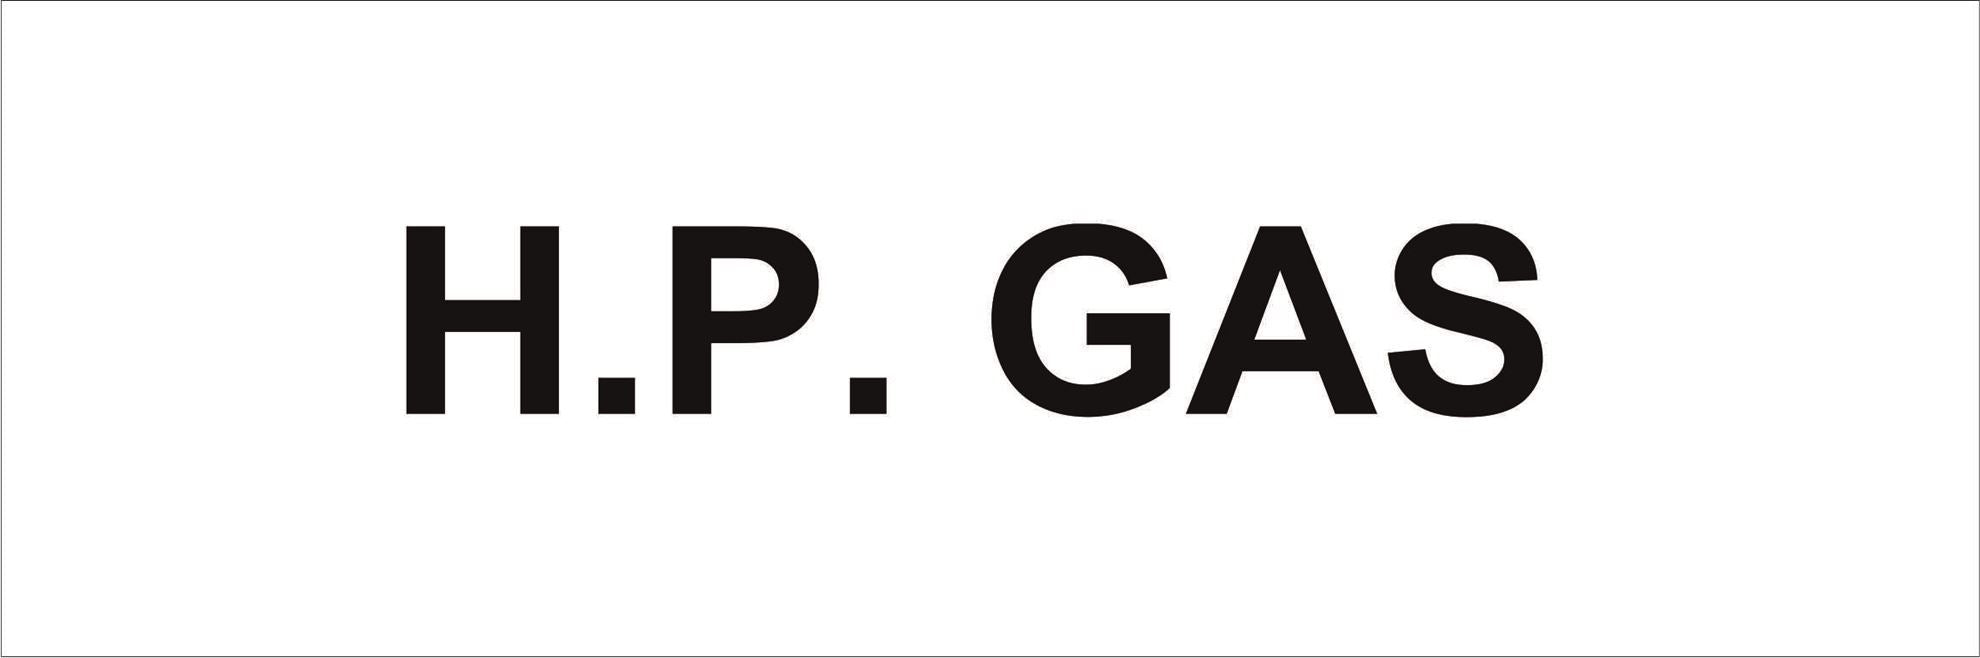 Pipeline Marking Label - H.P. GAS